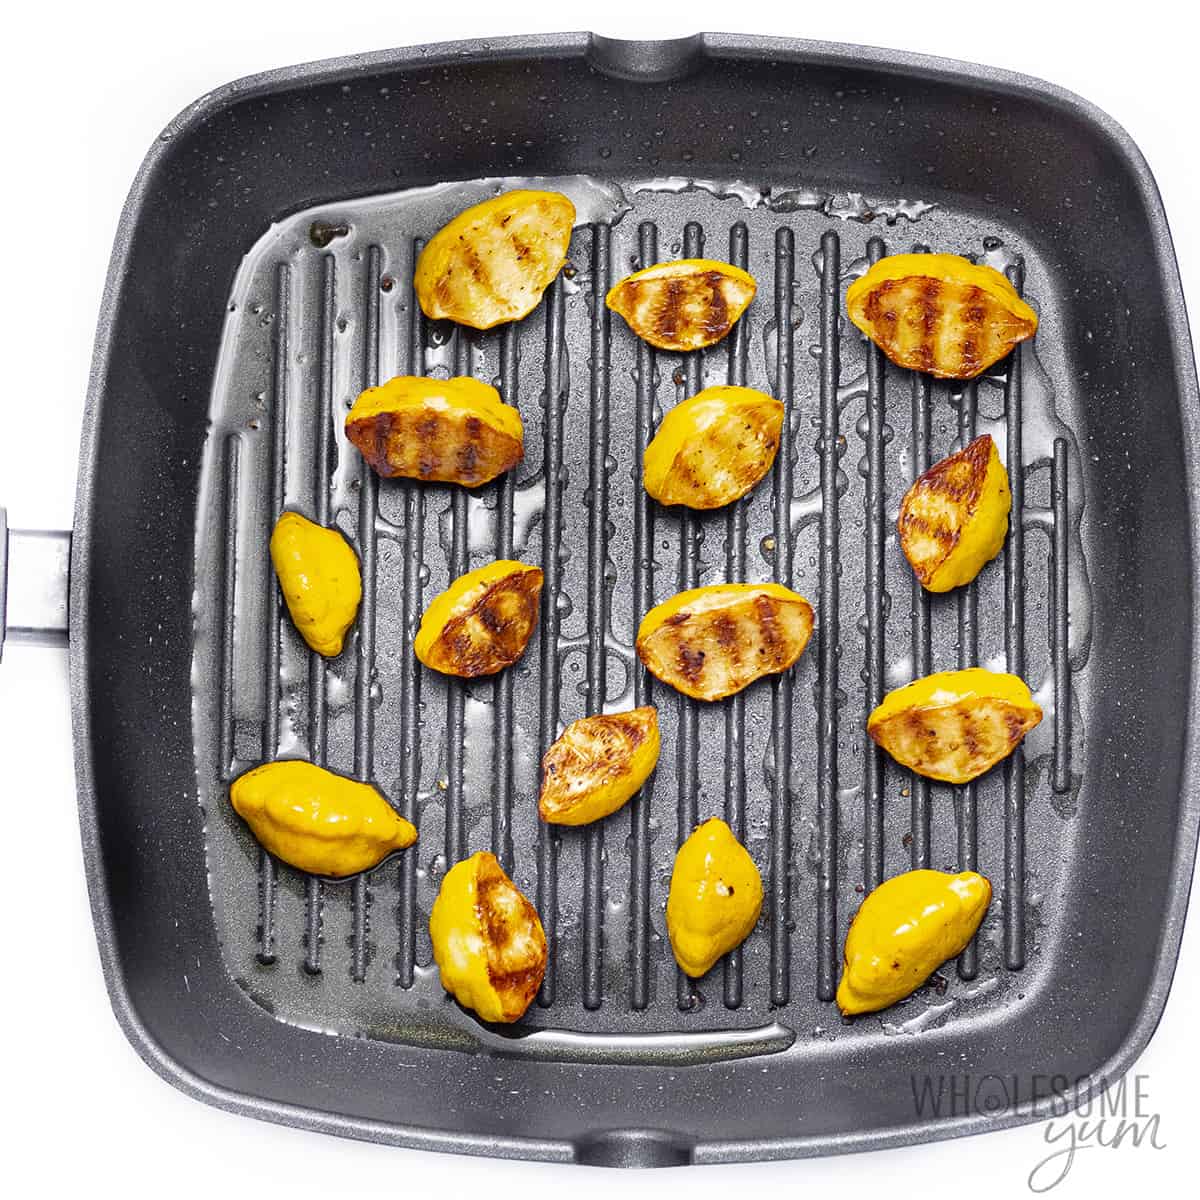 Patty pan squash in grill pan with grill marks.